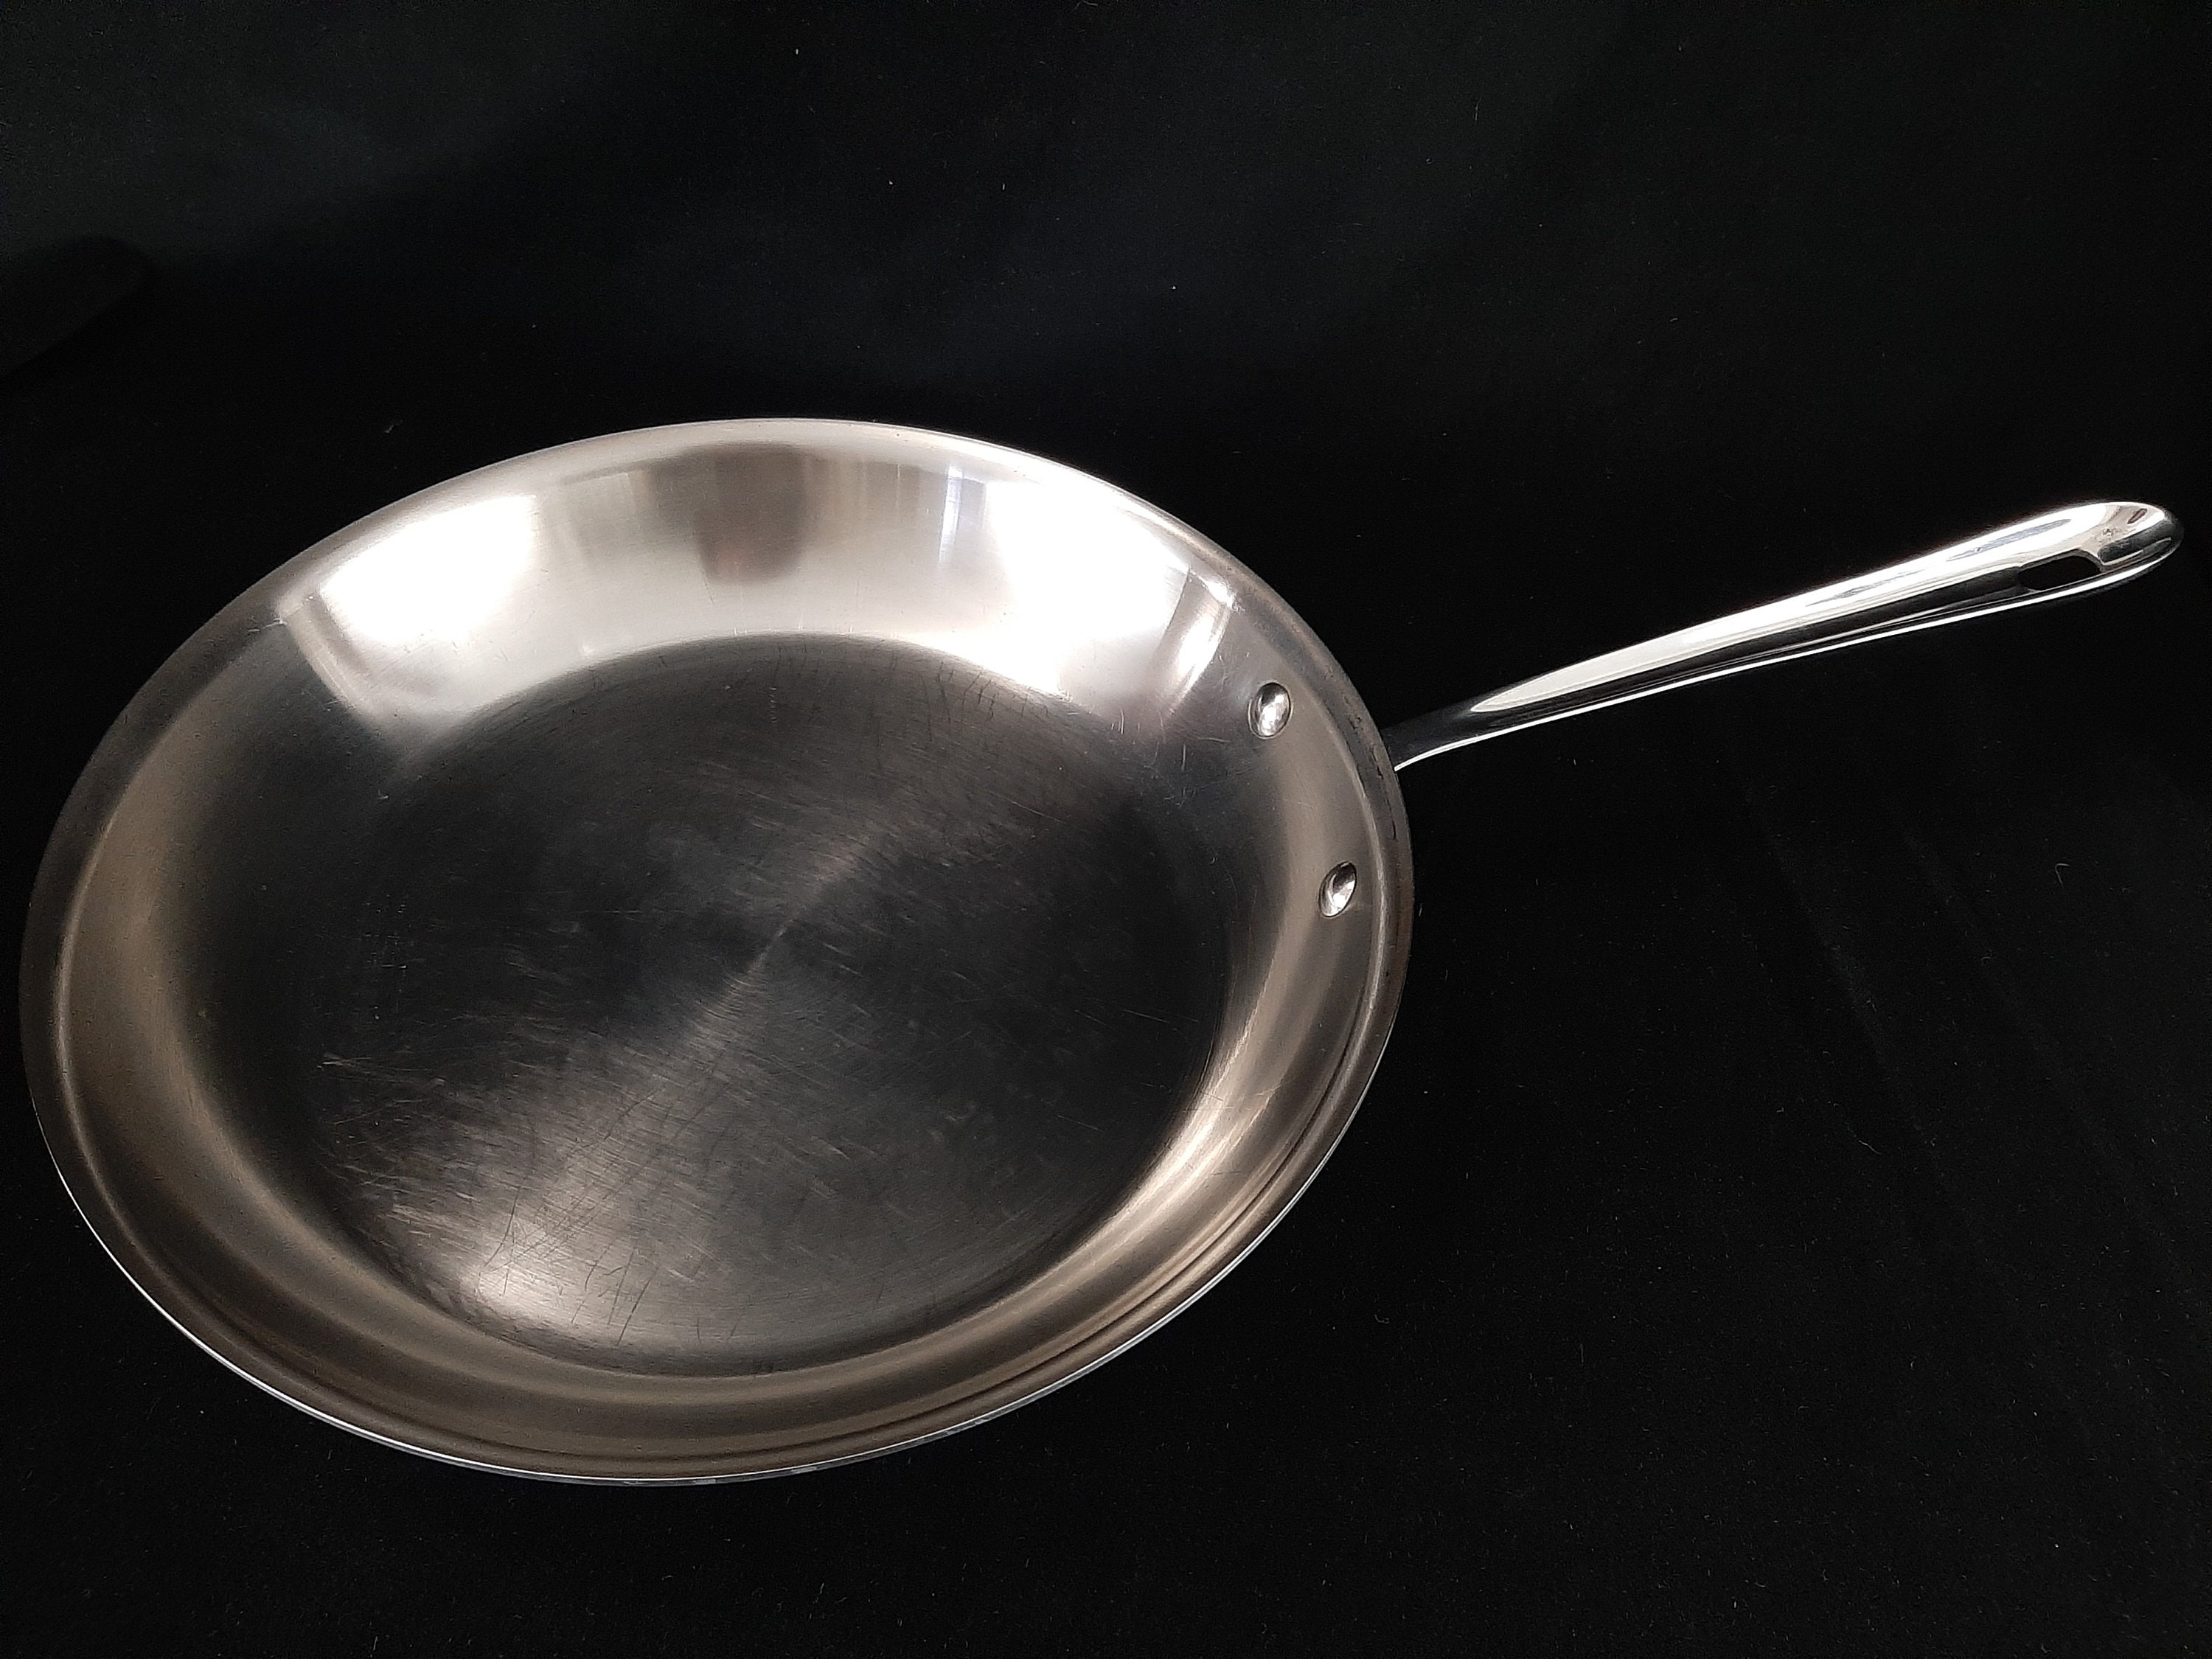 All-clad D3 Tri-ply Stainless Steel 12-inch Fry Pan Skillet Sauté Pan -   Denmark